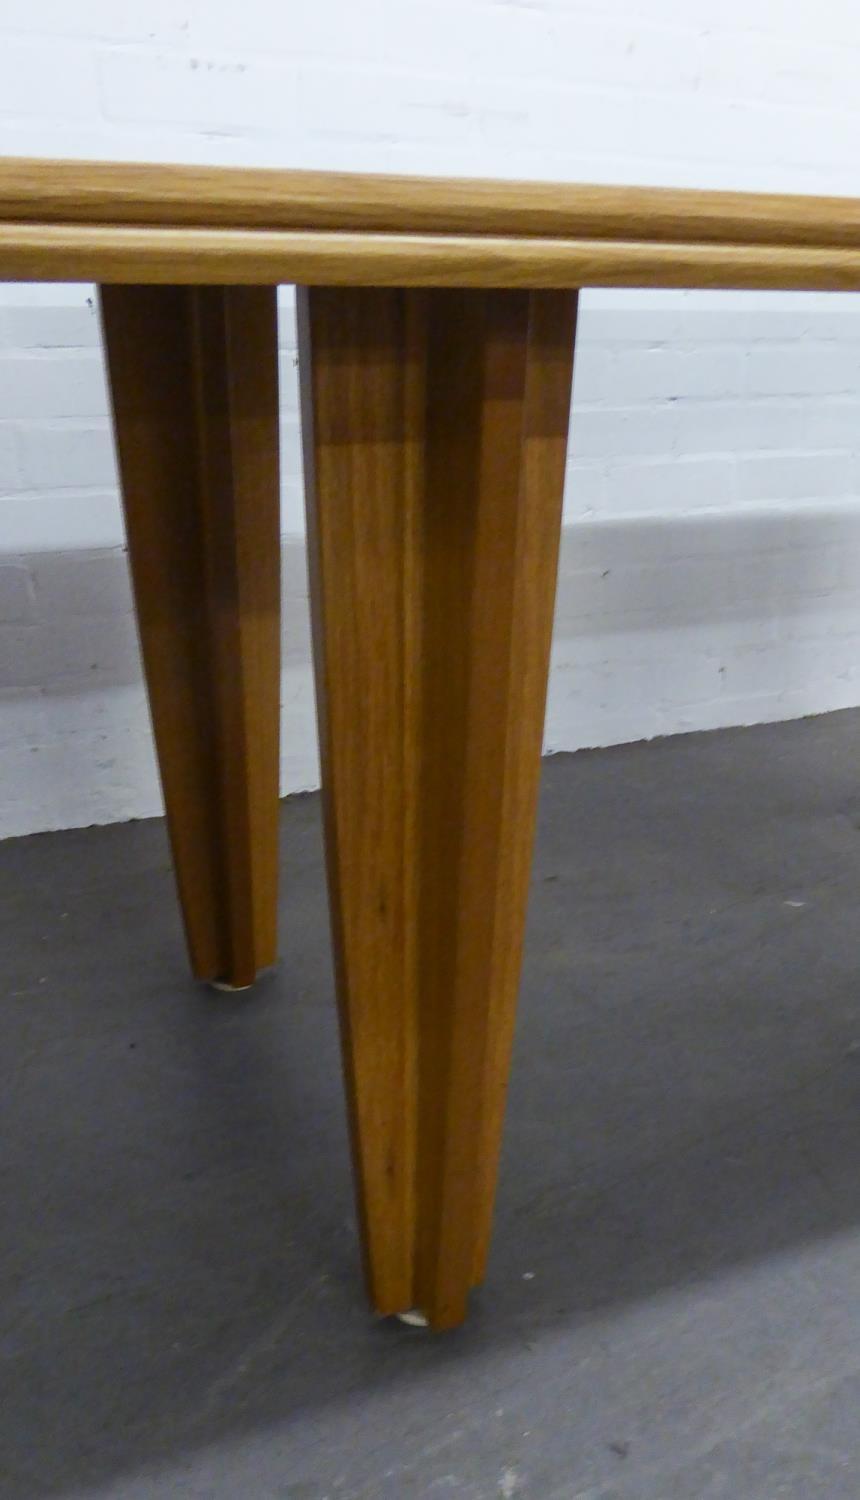 ART DECO STYLE LIGHTWOOD DINING TABLE, RAISED ON FOUR TAPERING LEGS - Image 3 of 3